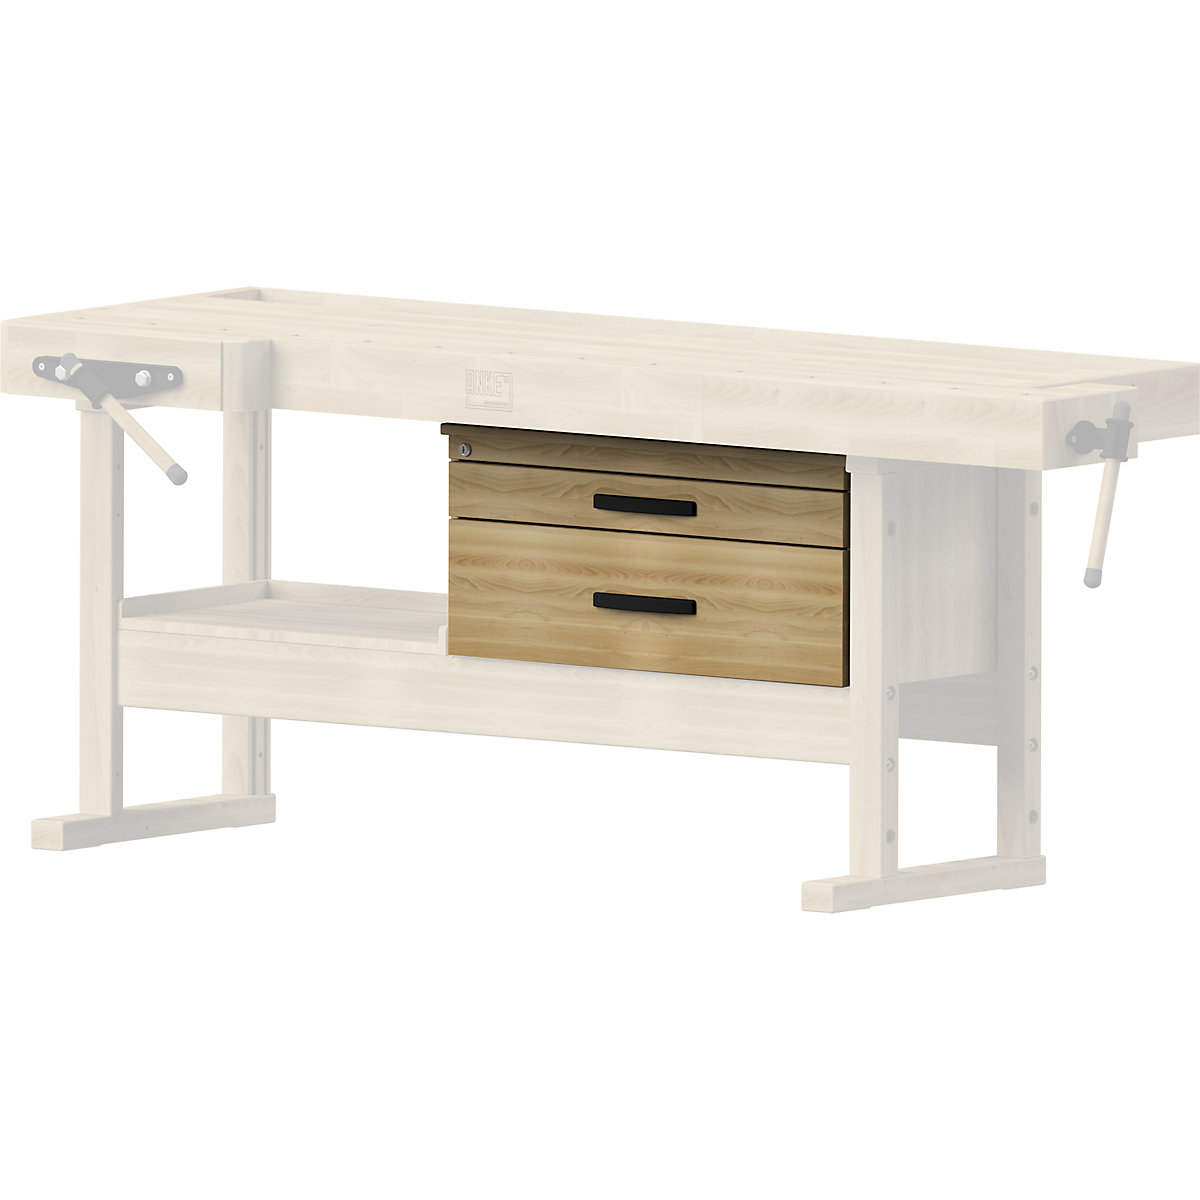 Add-on drawer unit for carpenters' planing bench – ANKE